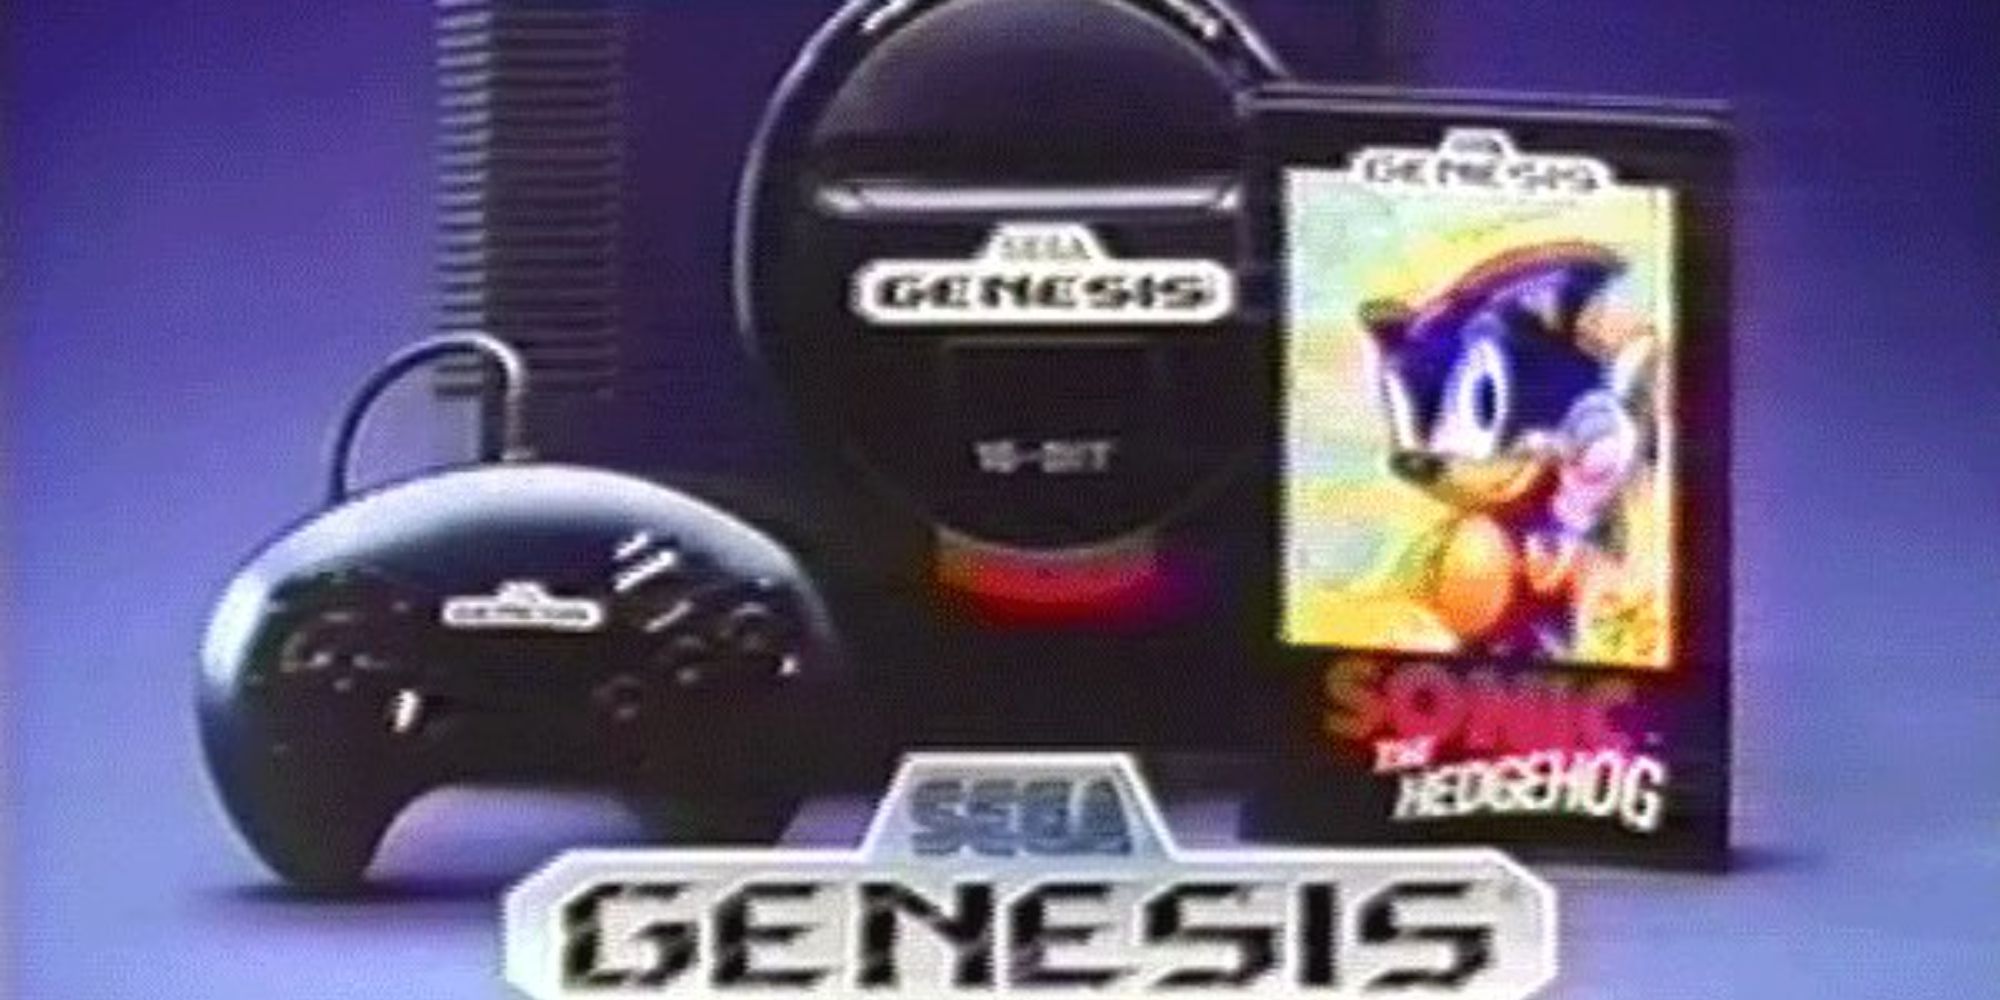 The Sega Genesis with a controller and Sonic case in a TV commercial